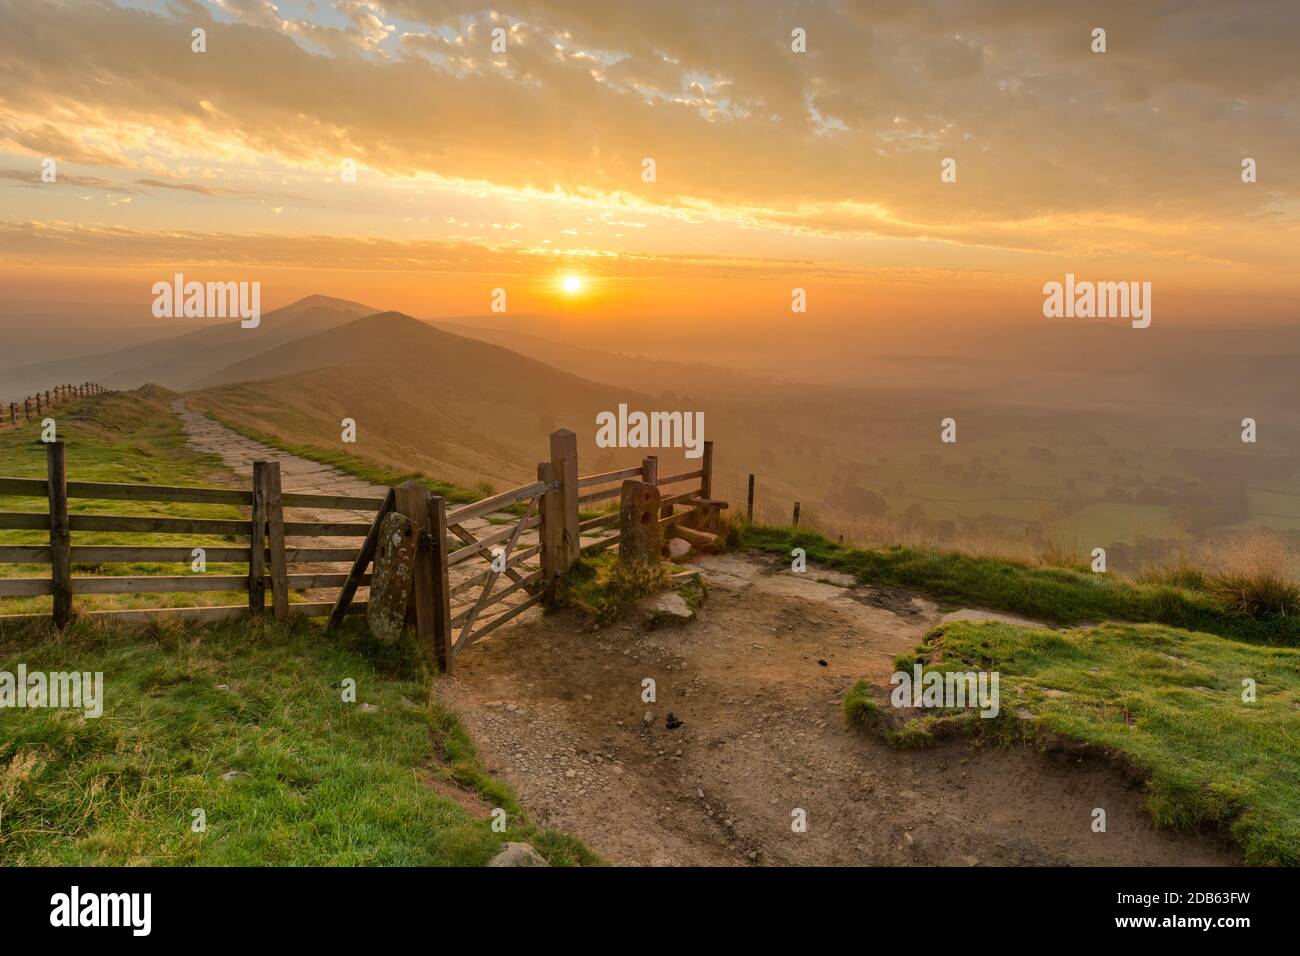 Golden sunrise at Mam Tor in the English Peak District on a hazy Autumn Morning with wooden gate. Stock Photo